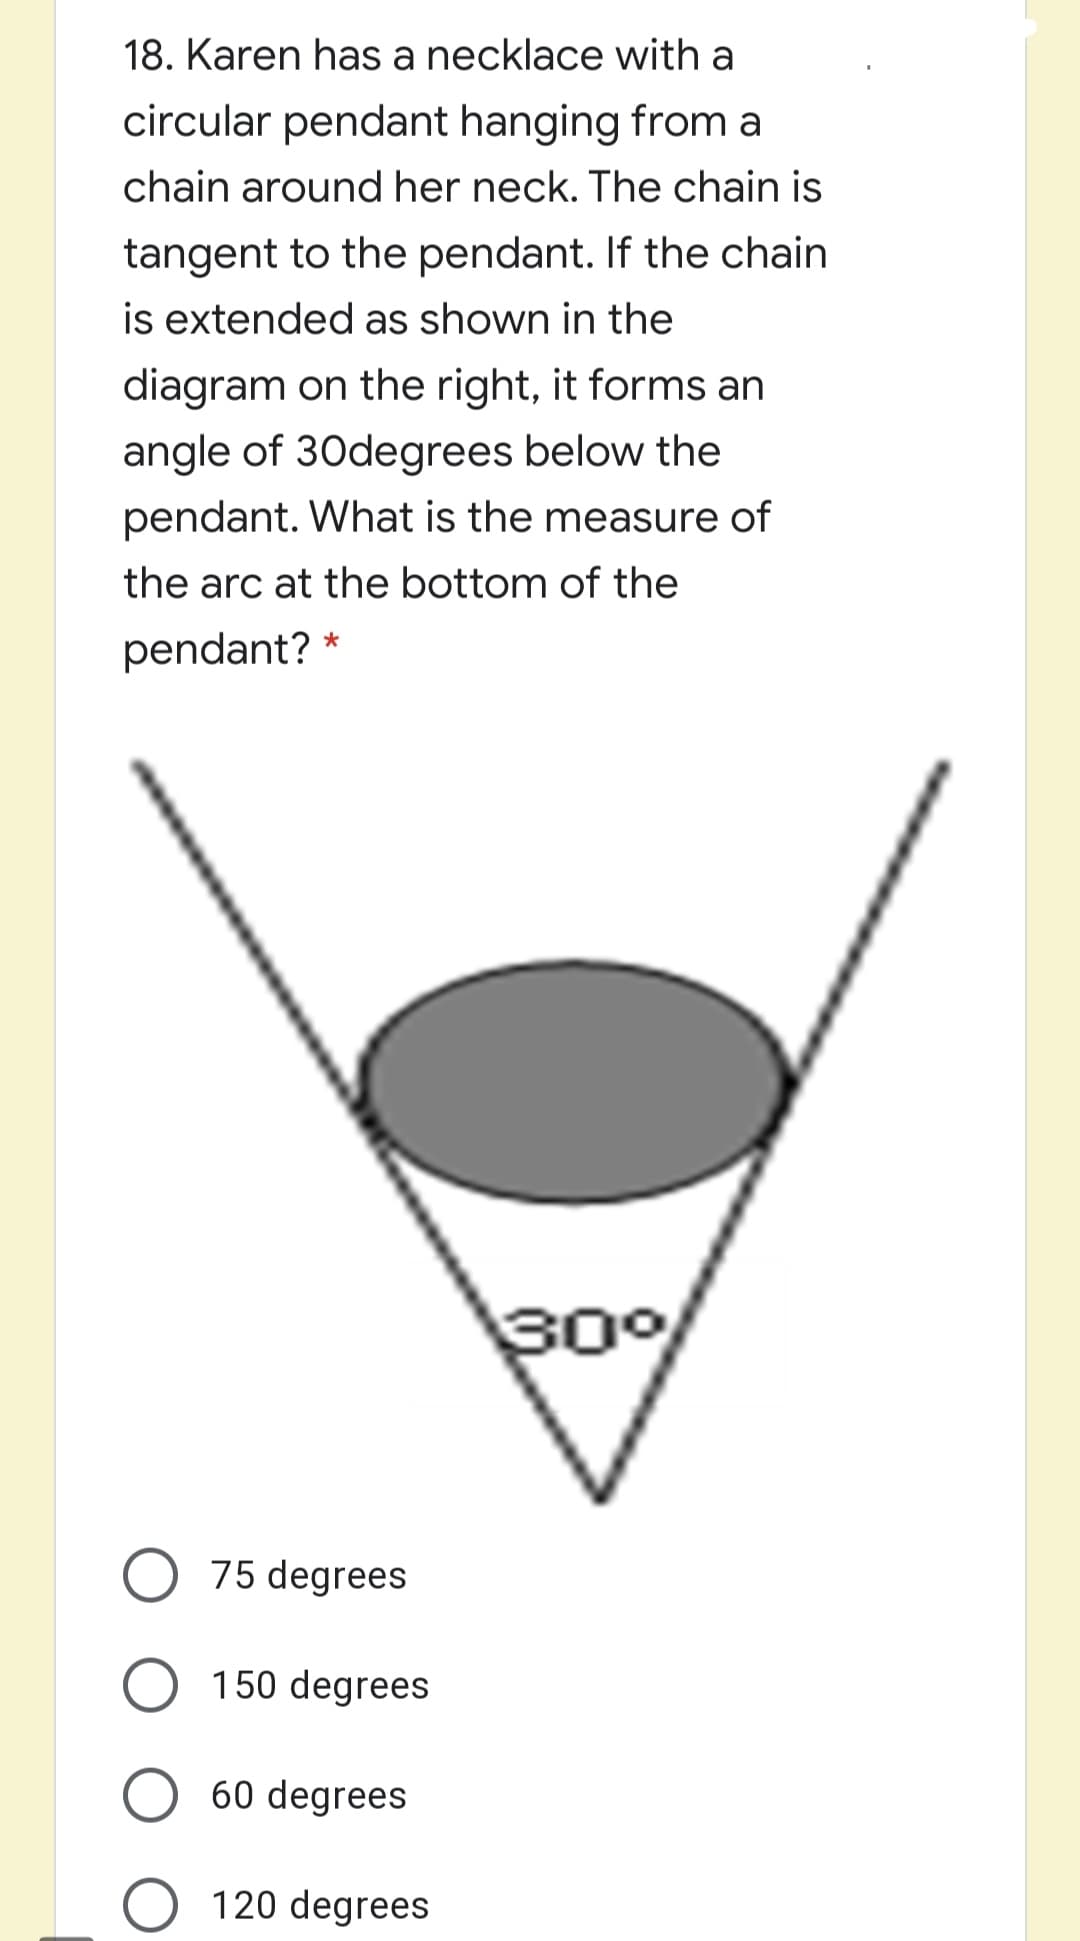 18. Karen has a necklace with a
circular pendant hanging from a
chain around her neck. The chain is
tangent to the pendant. If the chain
is extended as shown in the
diagram on the right, it forms an
angle of 30degrees below the
pendant. What is the measure of
the arc at the bottom of the
pendant? *
30%
75 degrees
150 degrees
60 degrees
120 degrees
